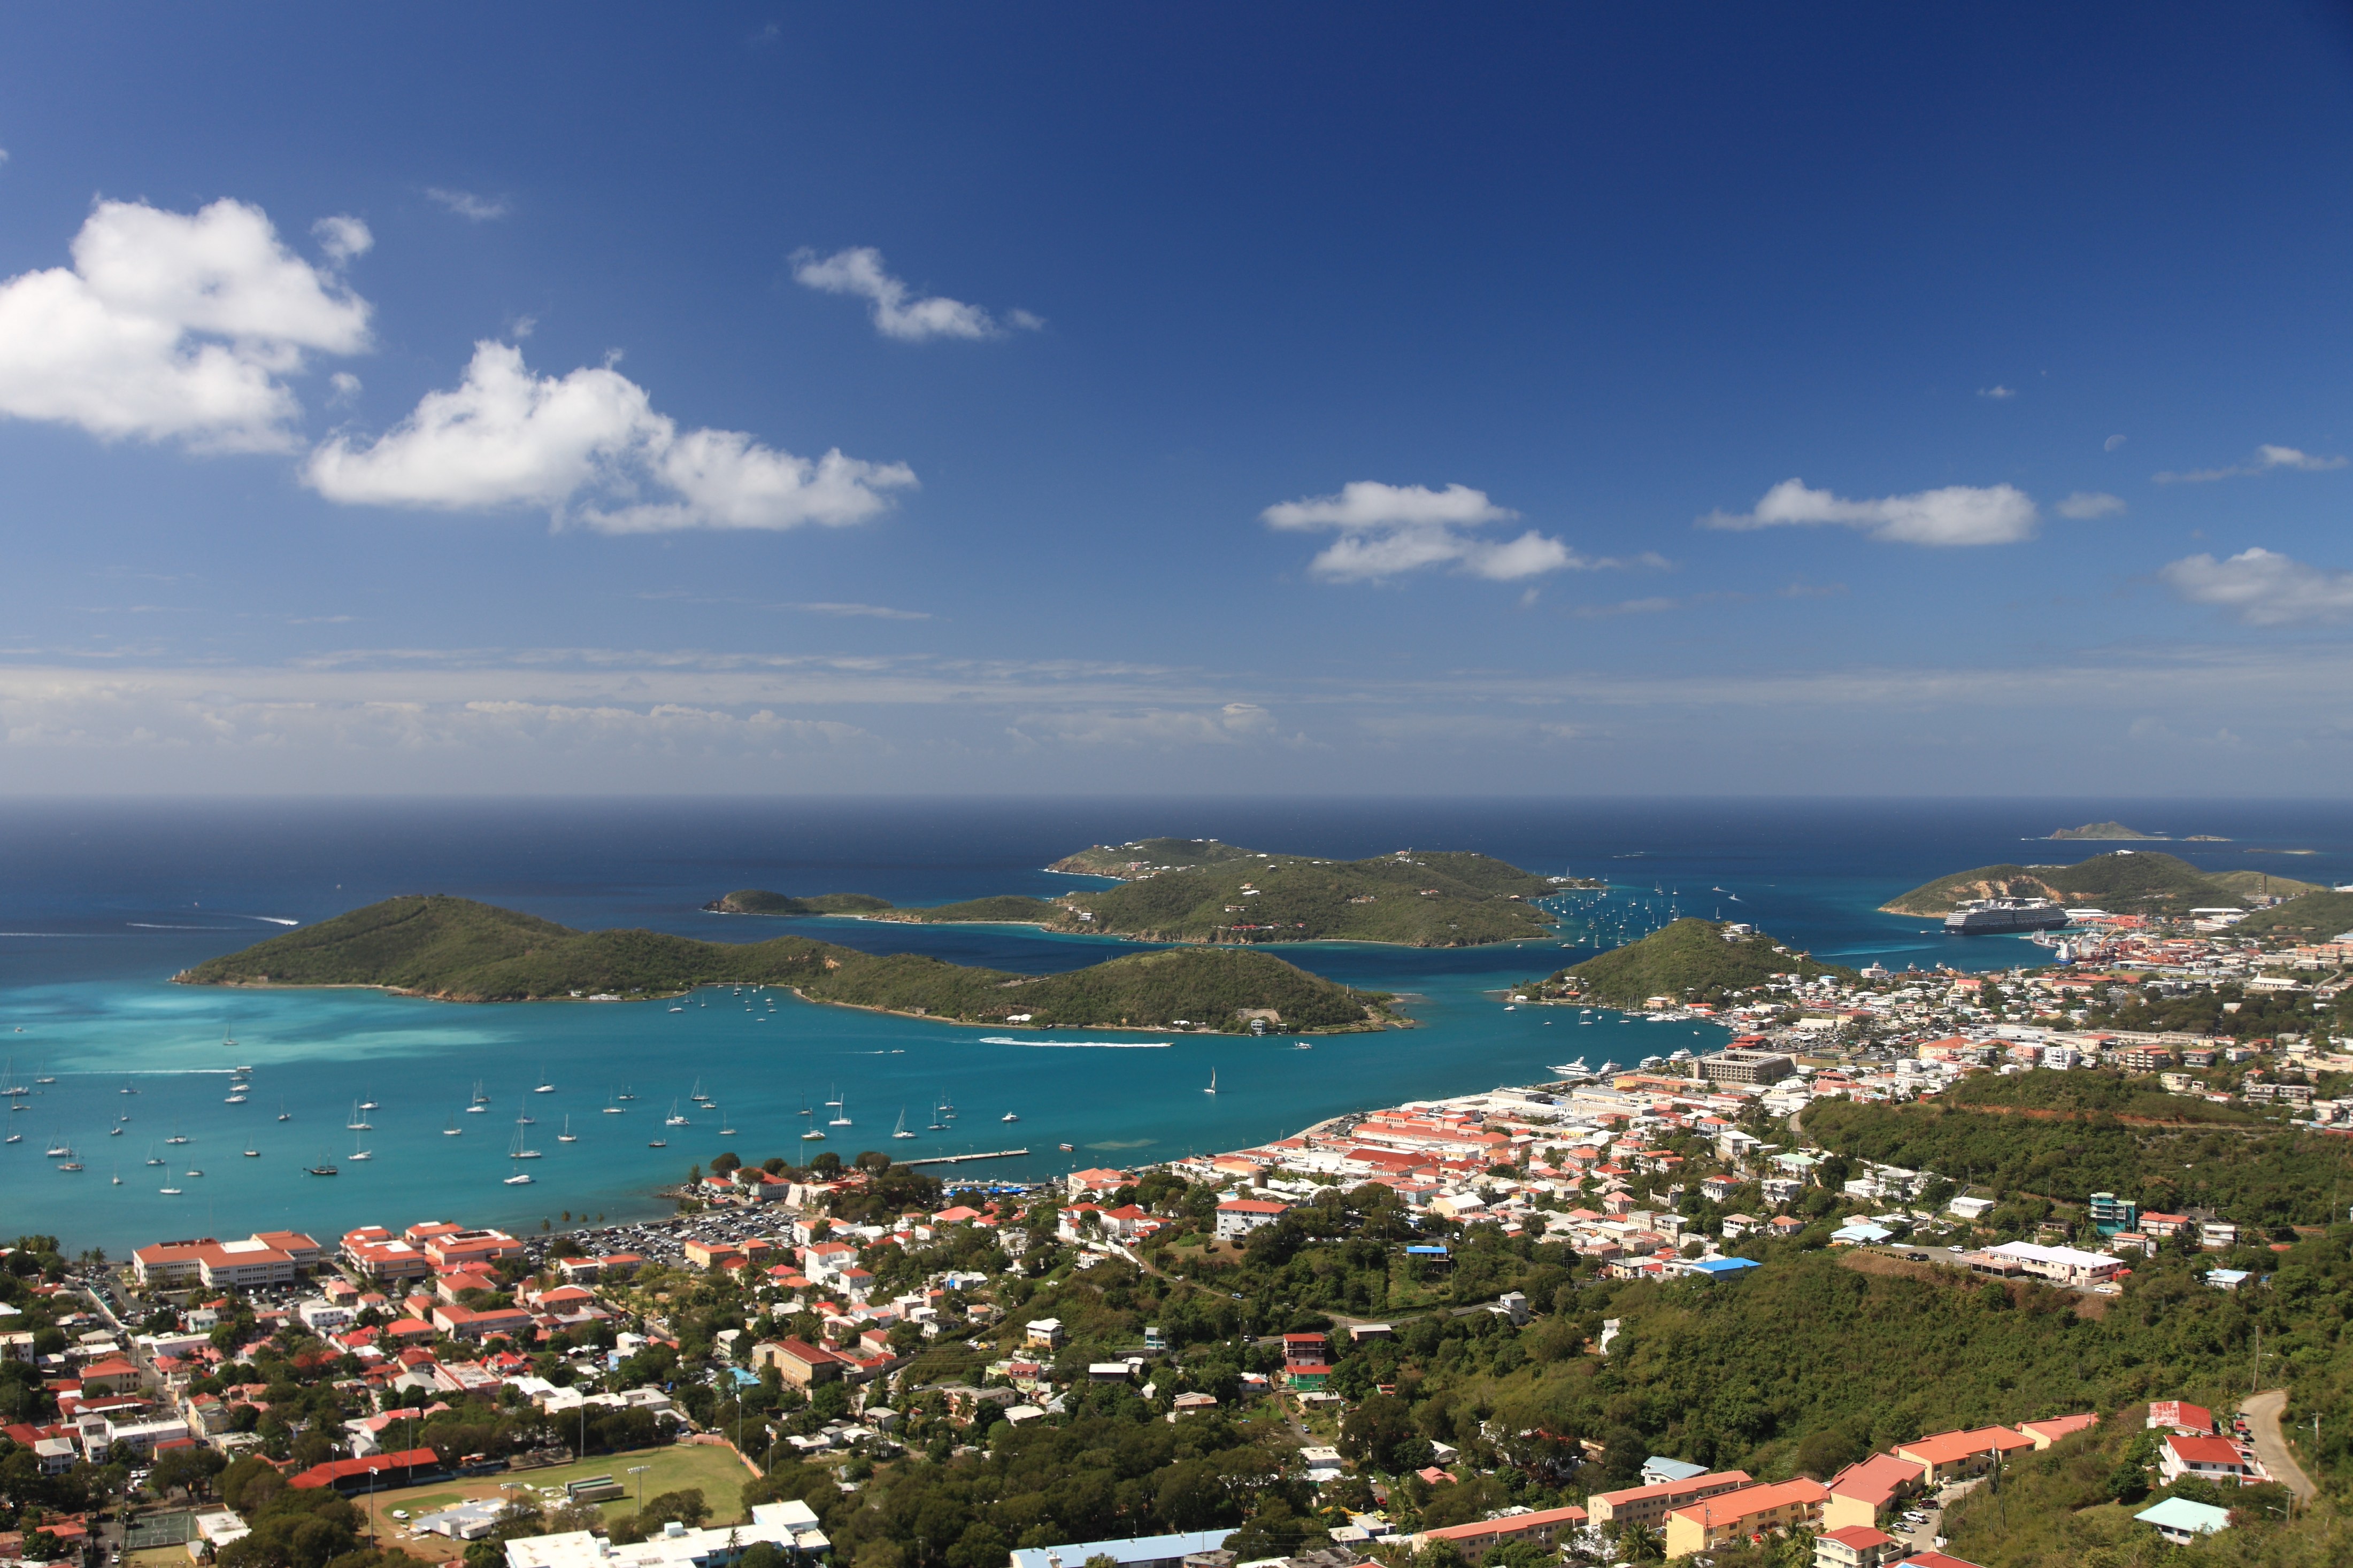 Wide, scenic view of St. Thomas island with boats, buildings, and green hills on a clear day